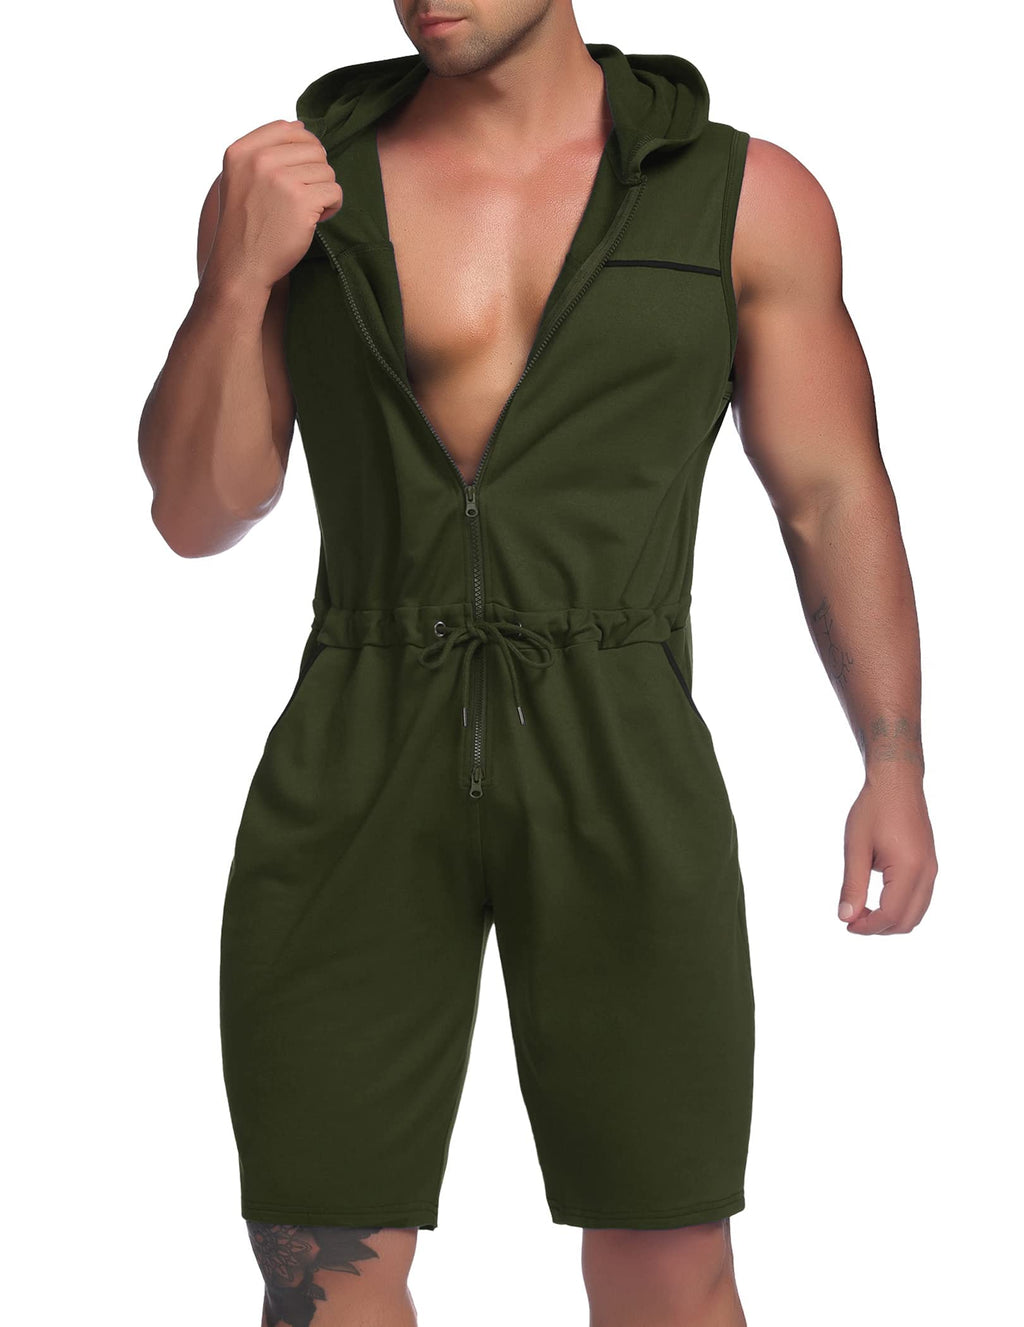 COOFANDY Mens Jumpsuits One Piece Shorts Casual Fashion Comfy Sleeveless Slim Fit Hooded Zipper Rompers Bodysuit with Pockets Army Green XX-Large - BeesActive Australia